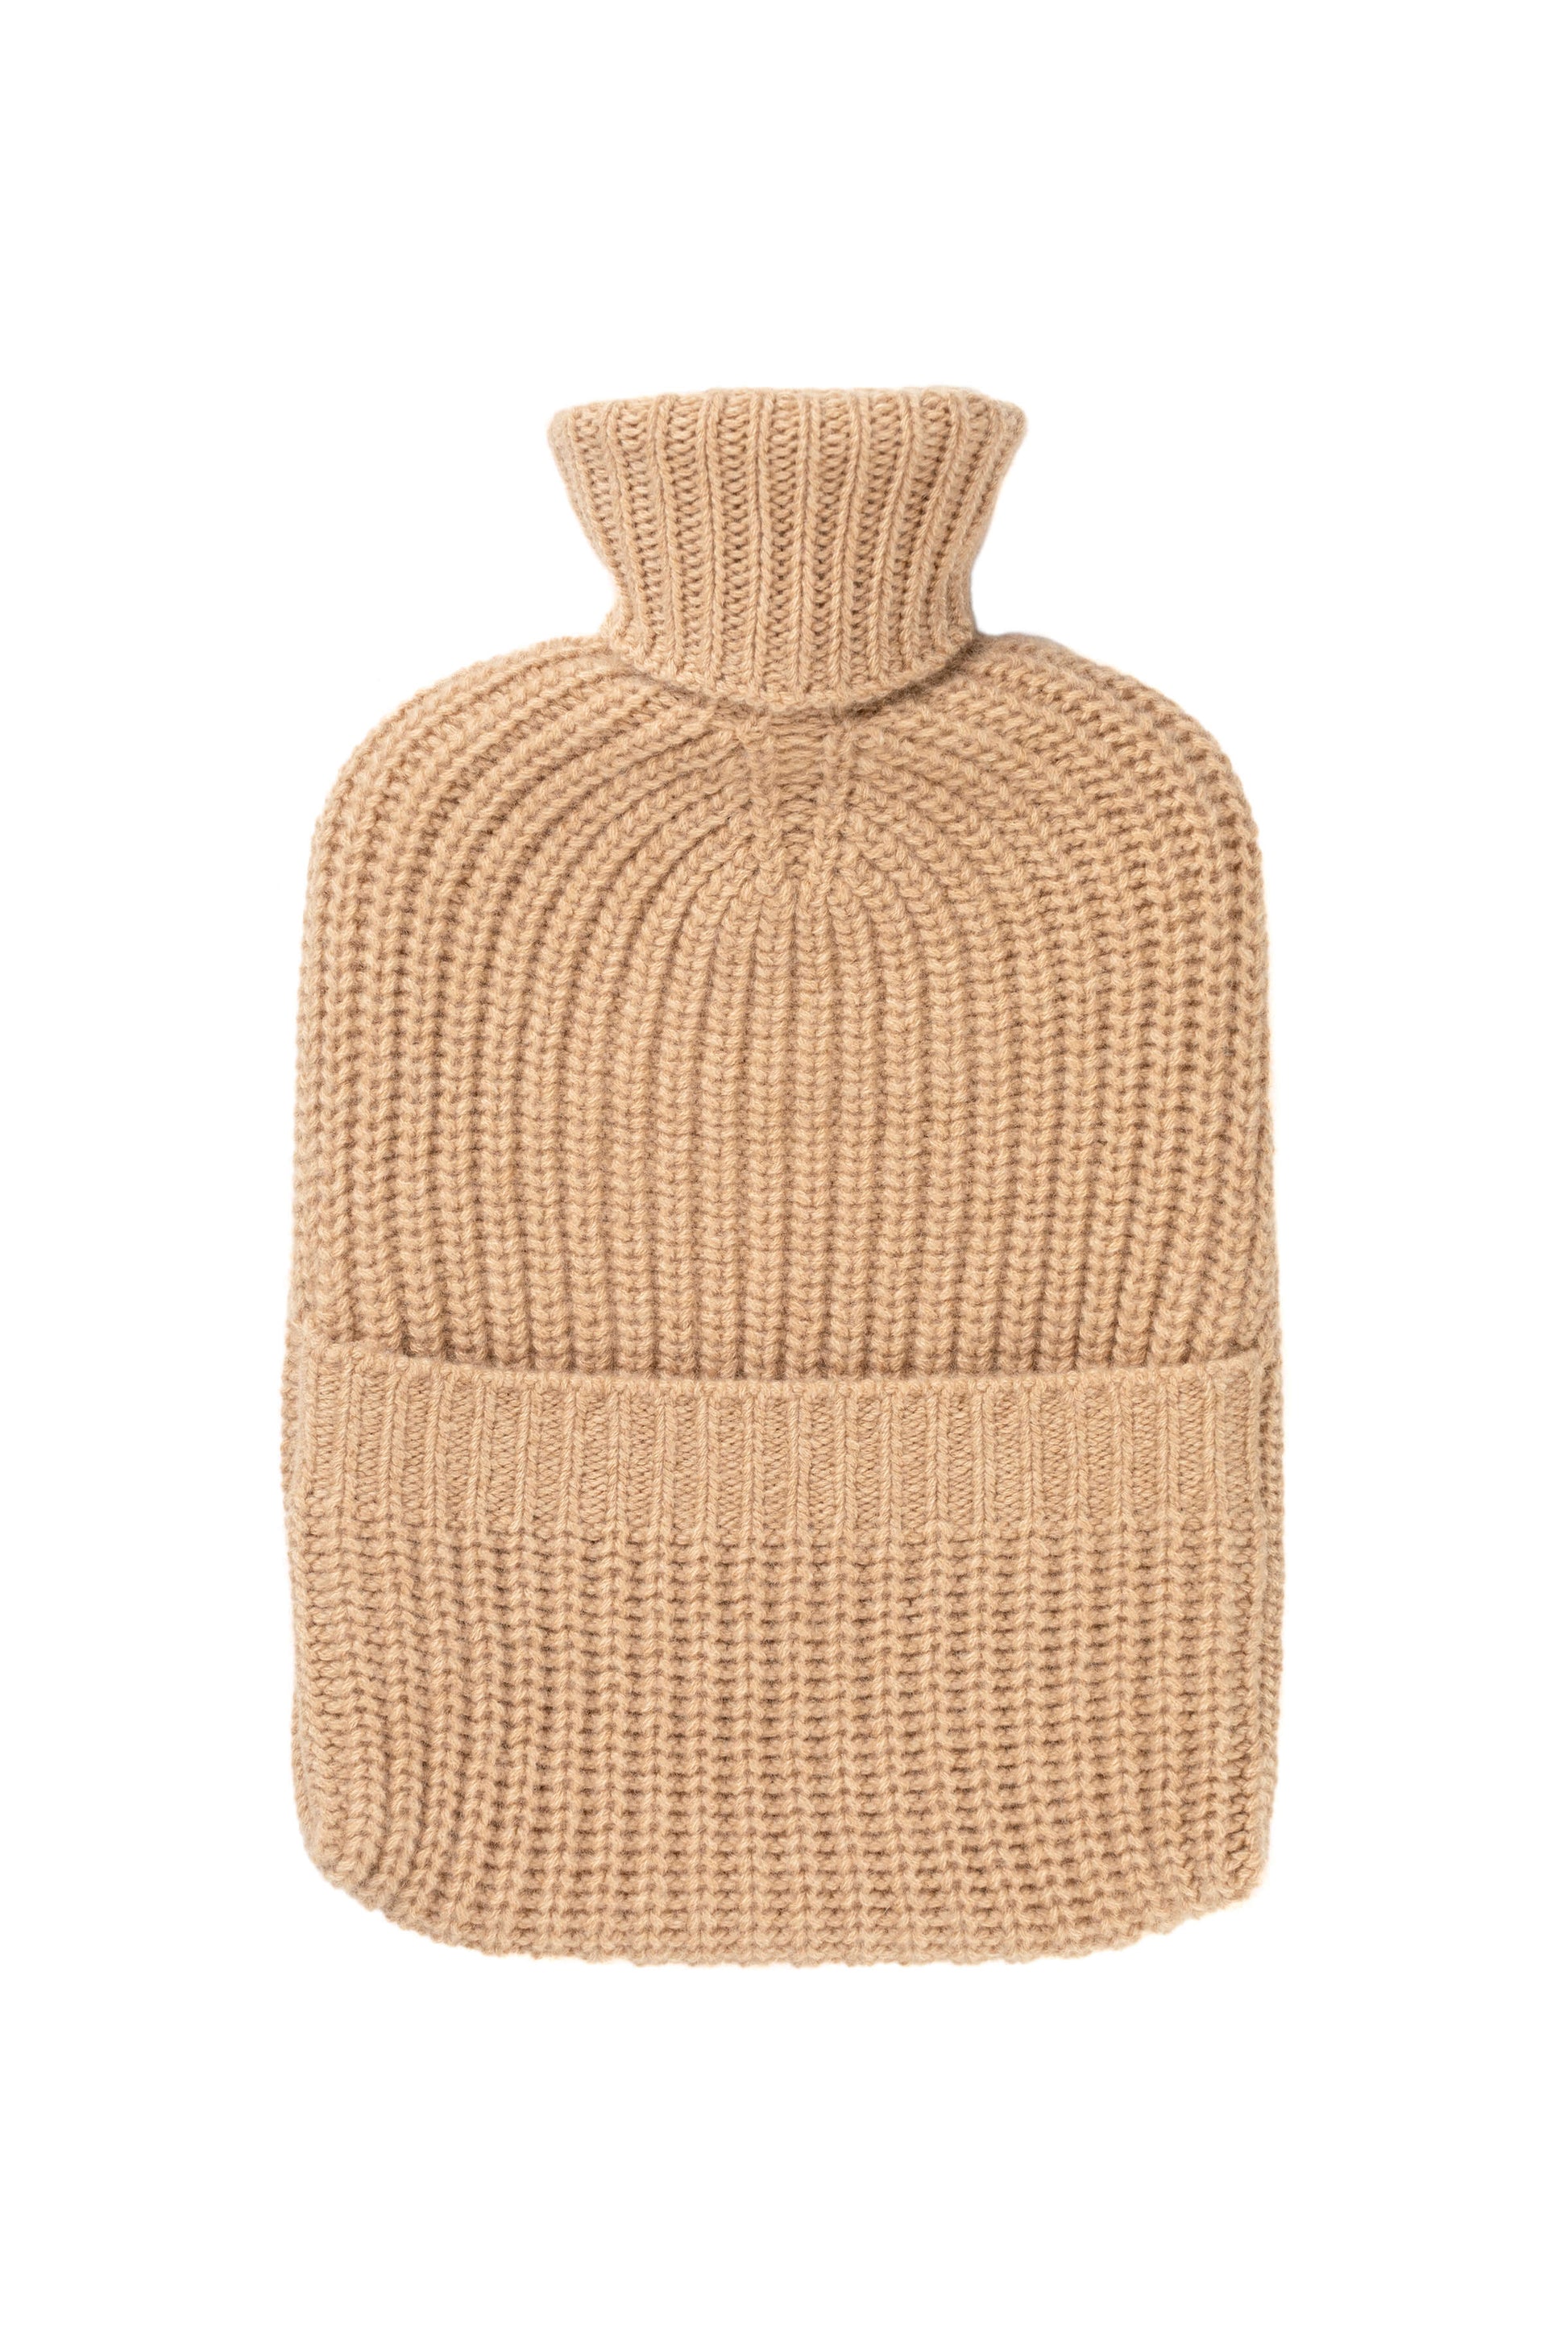 Johnstons of Elgin Cashmere Accessories Light Camel Ribbed Cashmere Hot Water Bottle PA000062HB0205